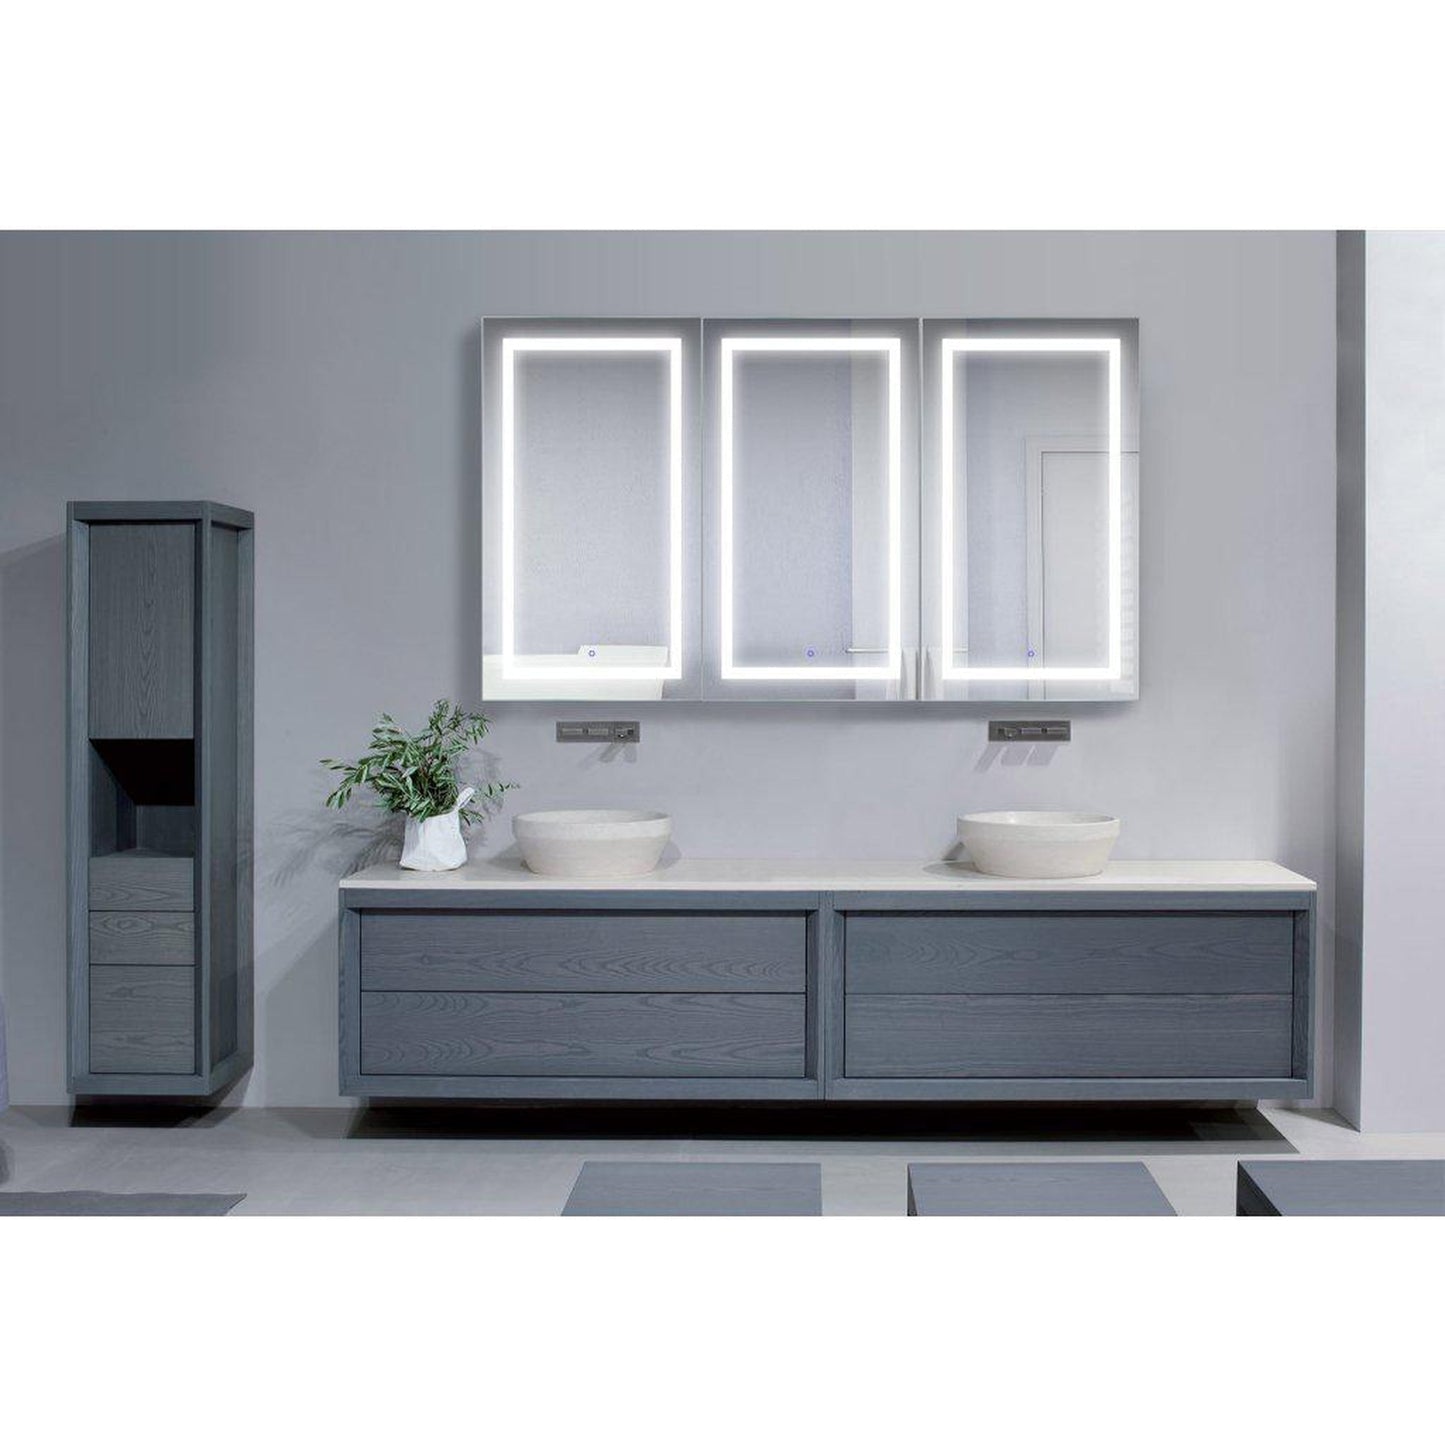 Krugg Reflections Svange 72" x 42" 5000K Tri-View Left-Left-Right Opening Recessed/Surface-Mount Illuminated Silver Backed LED Medicine Cabinet Mirror With Built-in Defogger, Dimmer and Electrical Outlet